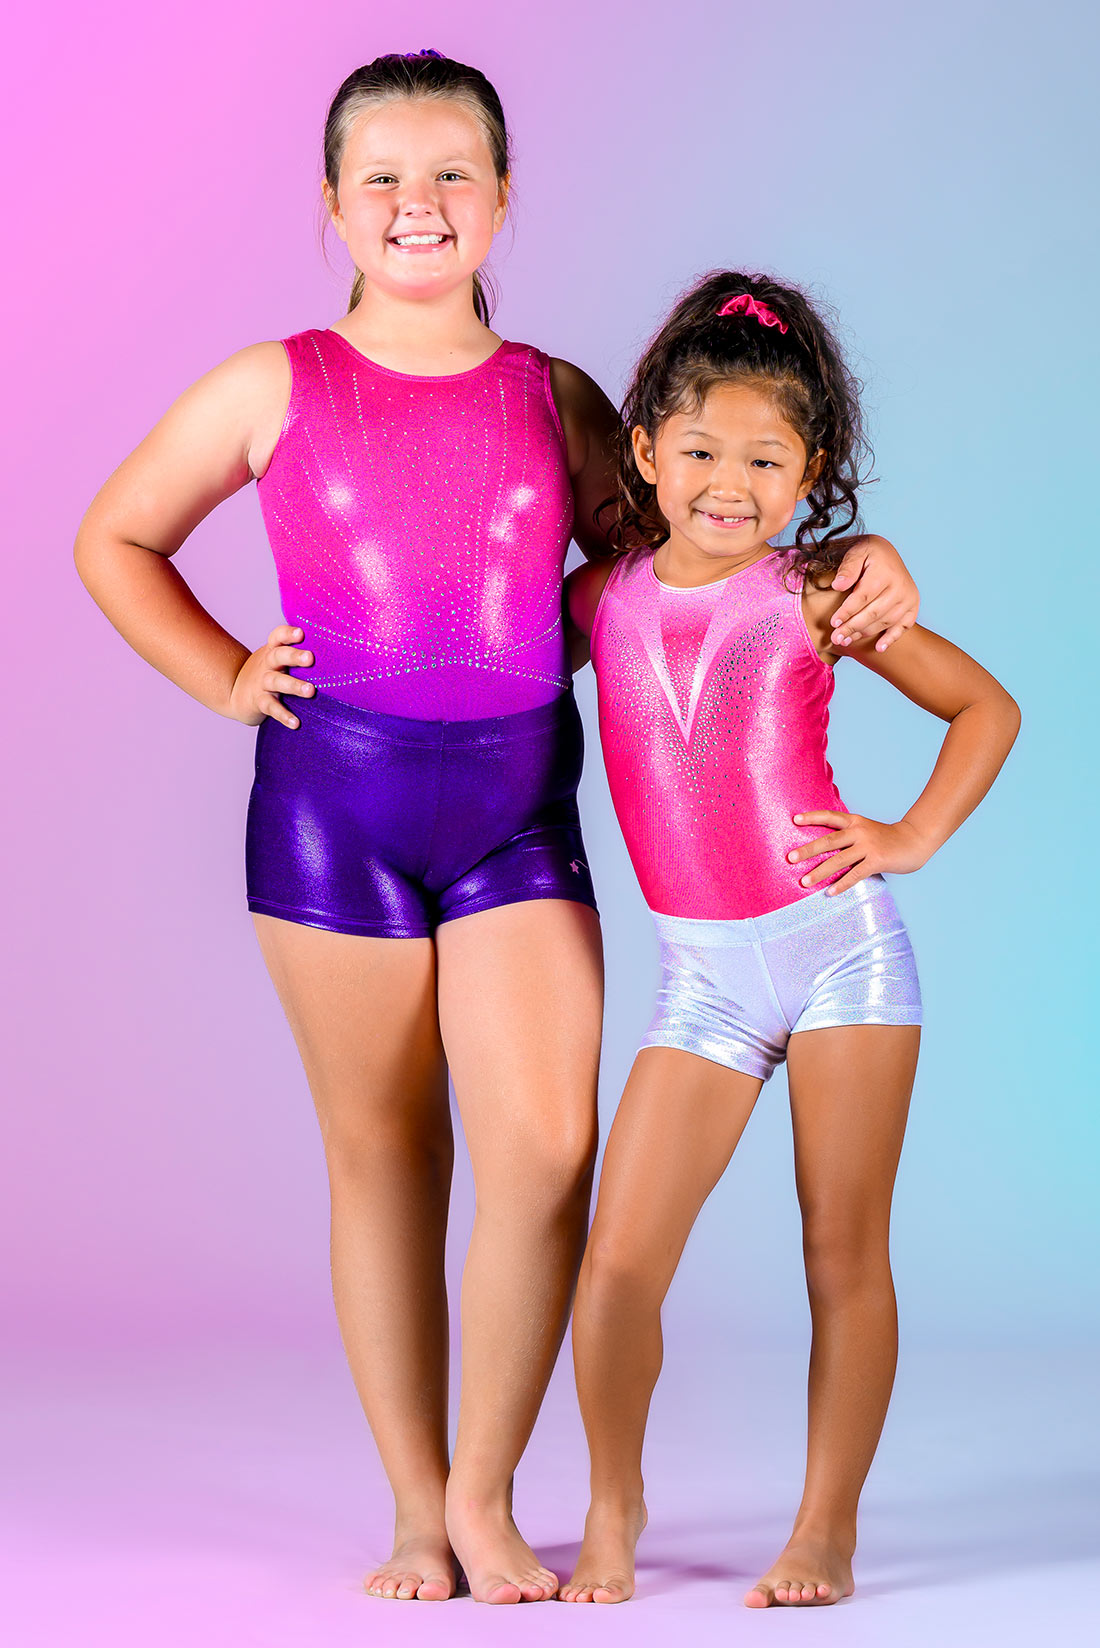 Barbie Girl Outfit for babies. Baby Girl Barbie Outfit. This Pink Girl  Sparkle Leotard is a favorite for babies an…, roupas da barbie girl 